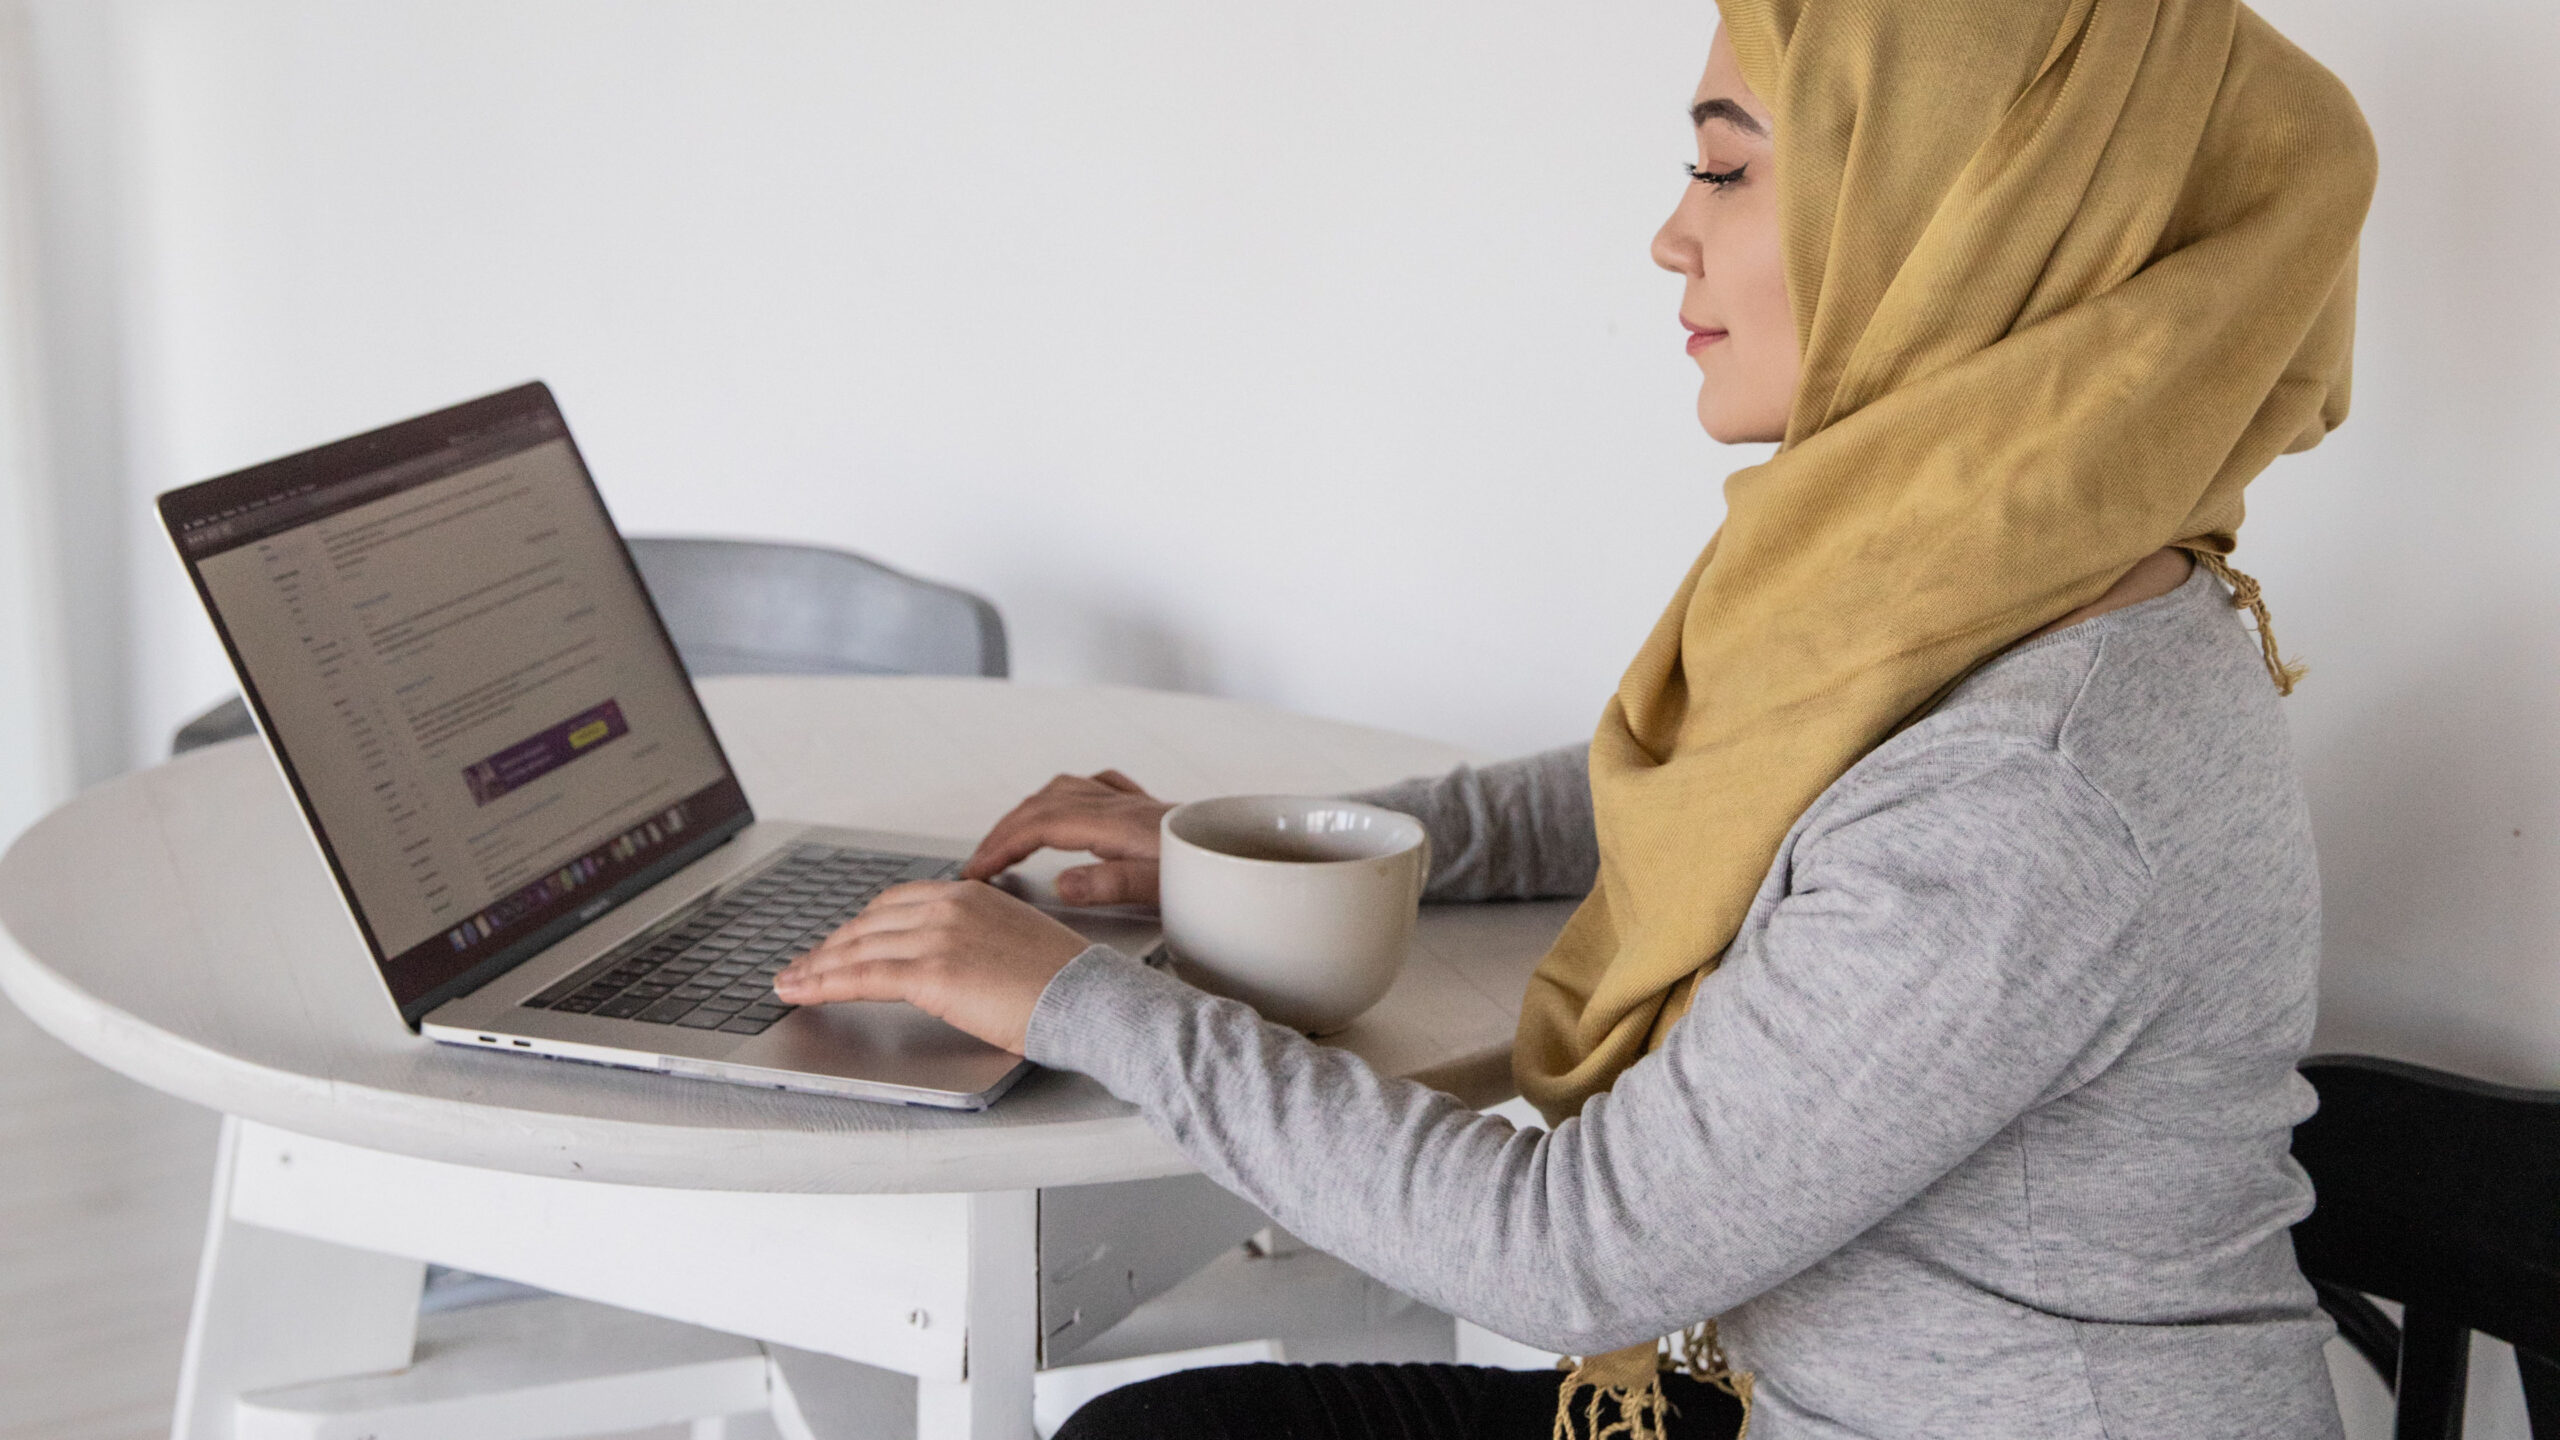 Woman sits at table using laptop. She wears a headscarf and has a coffee.